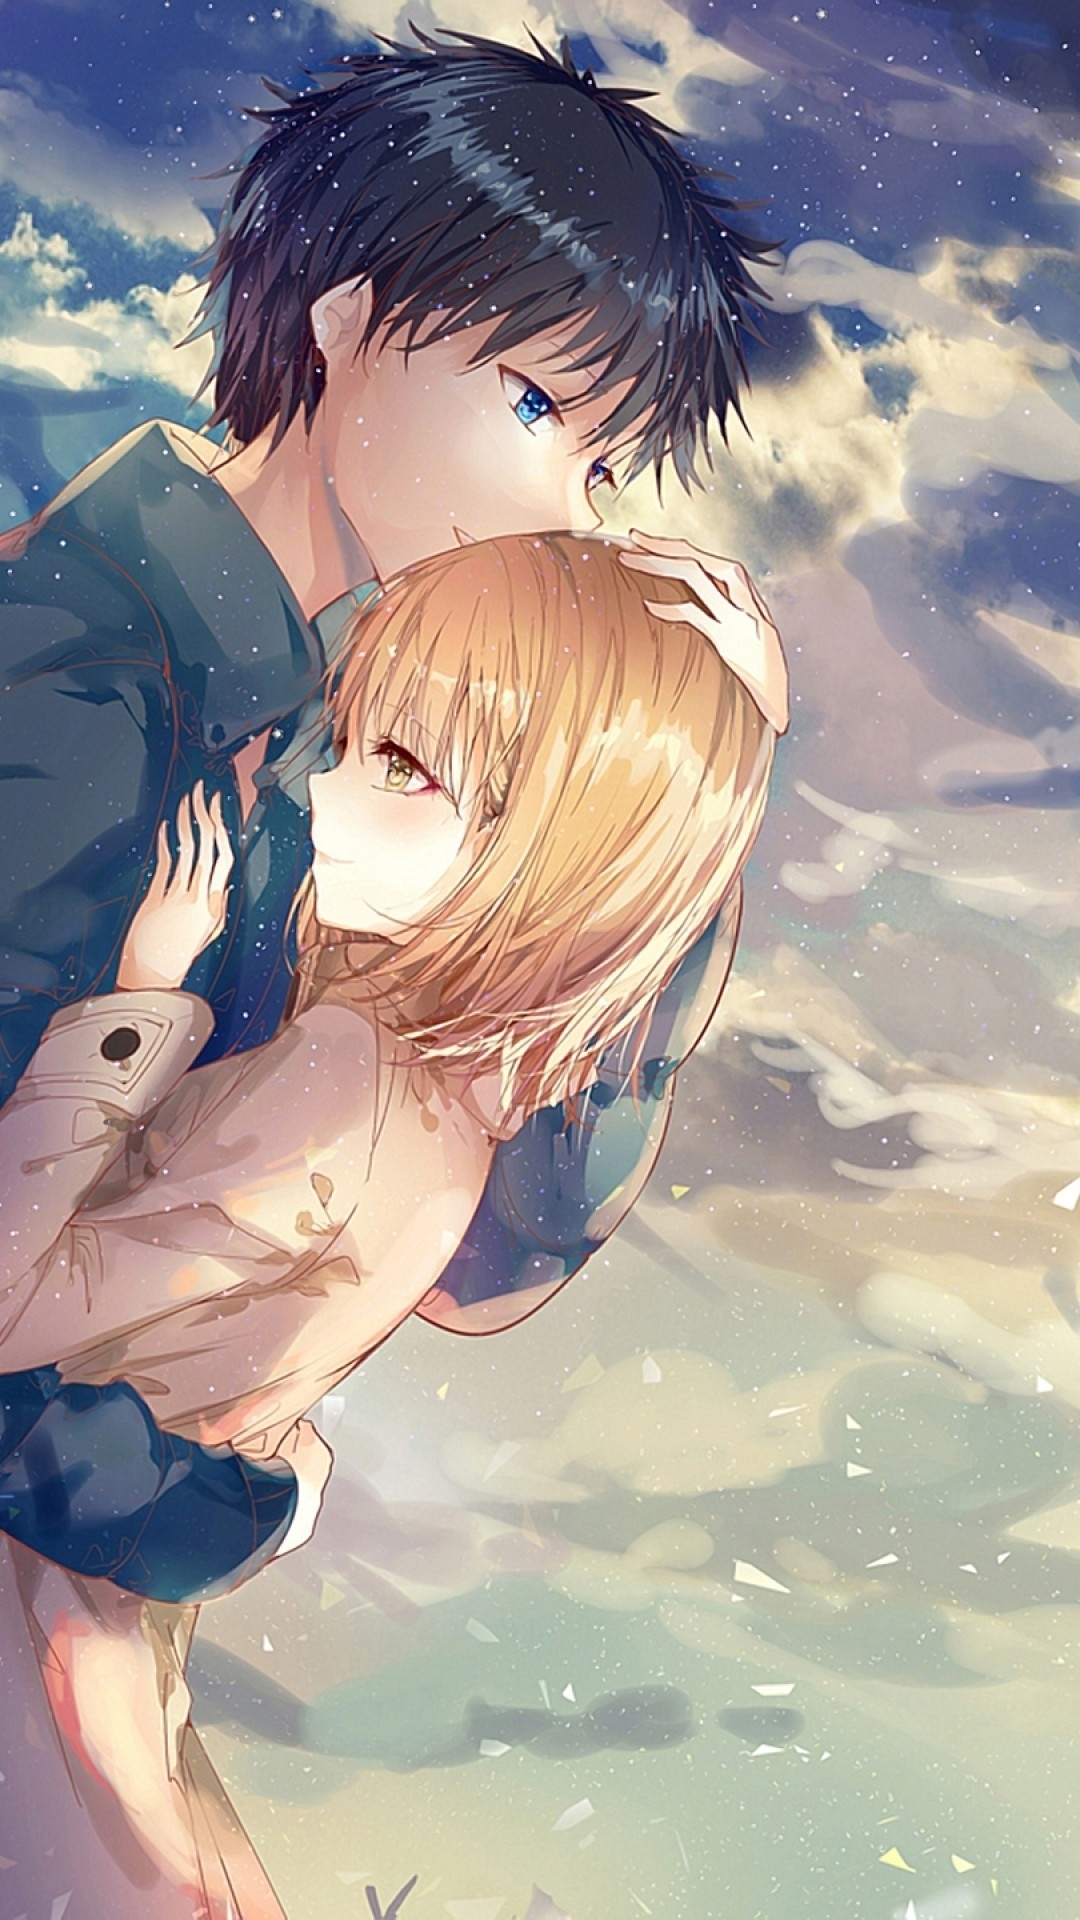 10 Latest Cute Anime Couple Pictures FULL HD 1080p For PC Desktop 2020